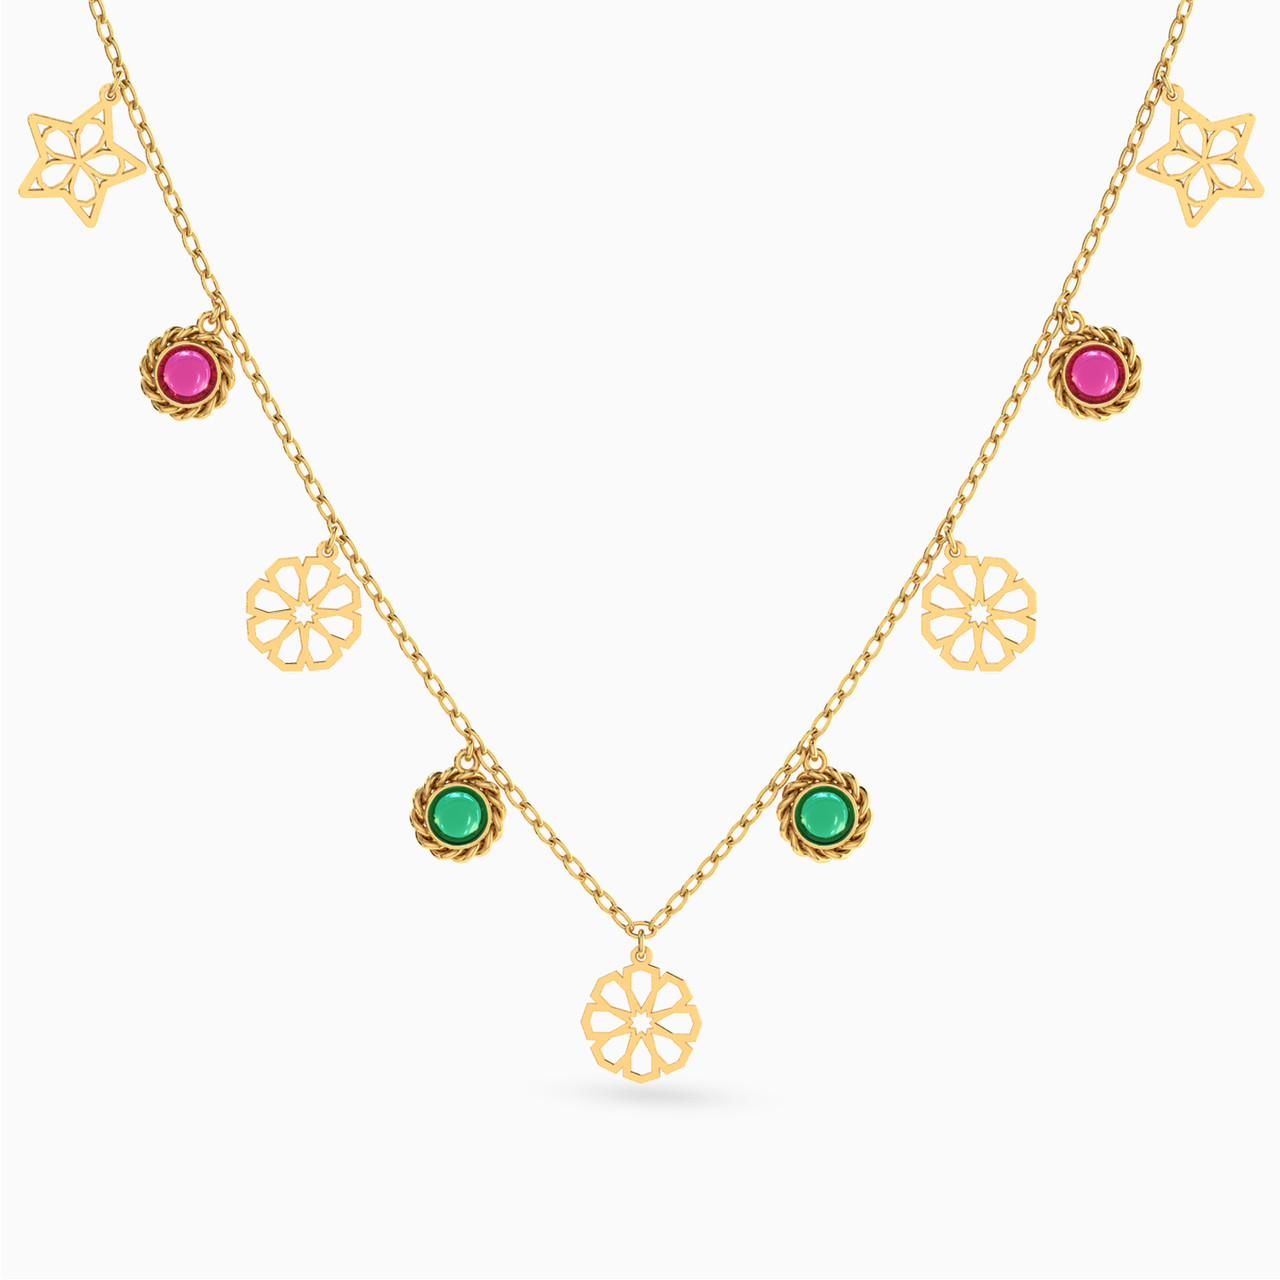 Multi-shaped Colored Stones Charms Necklace with 18K Gold Chain